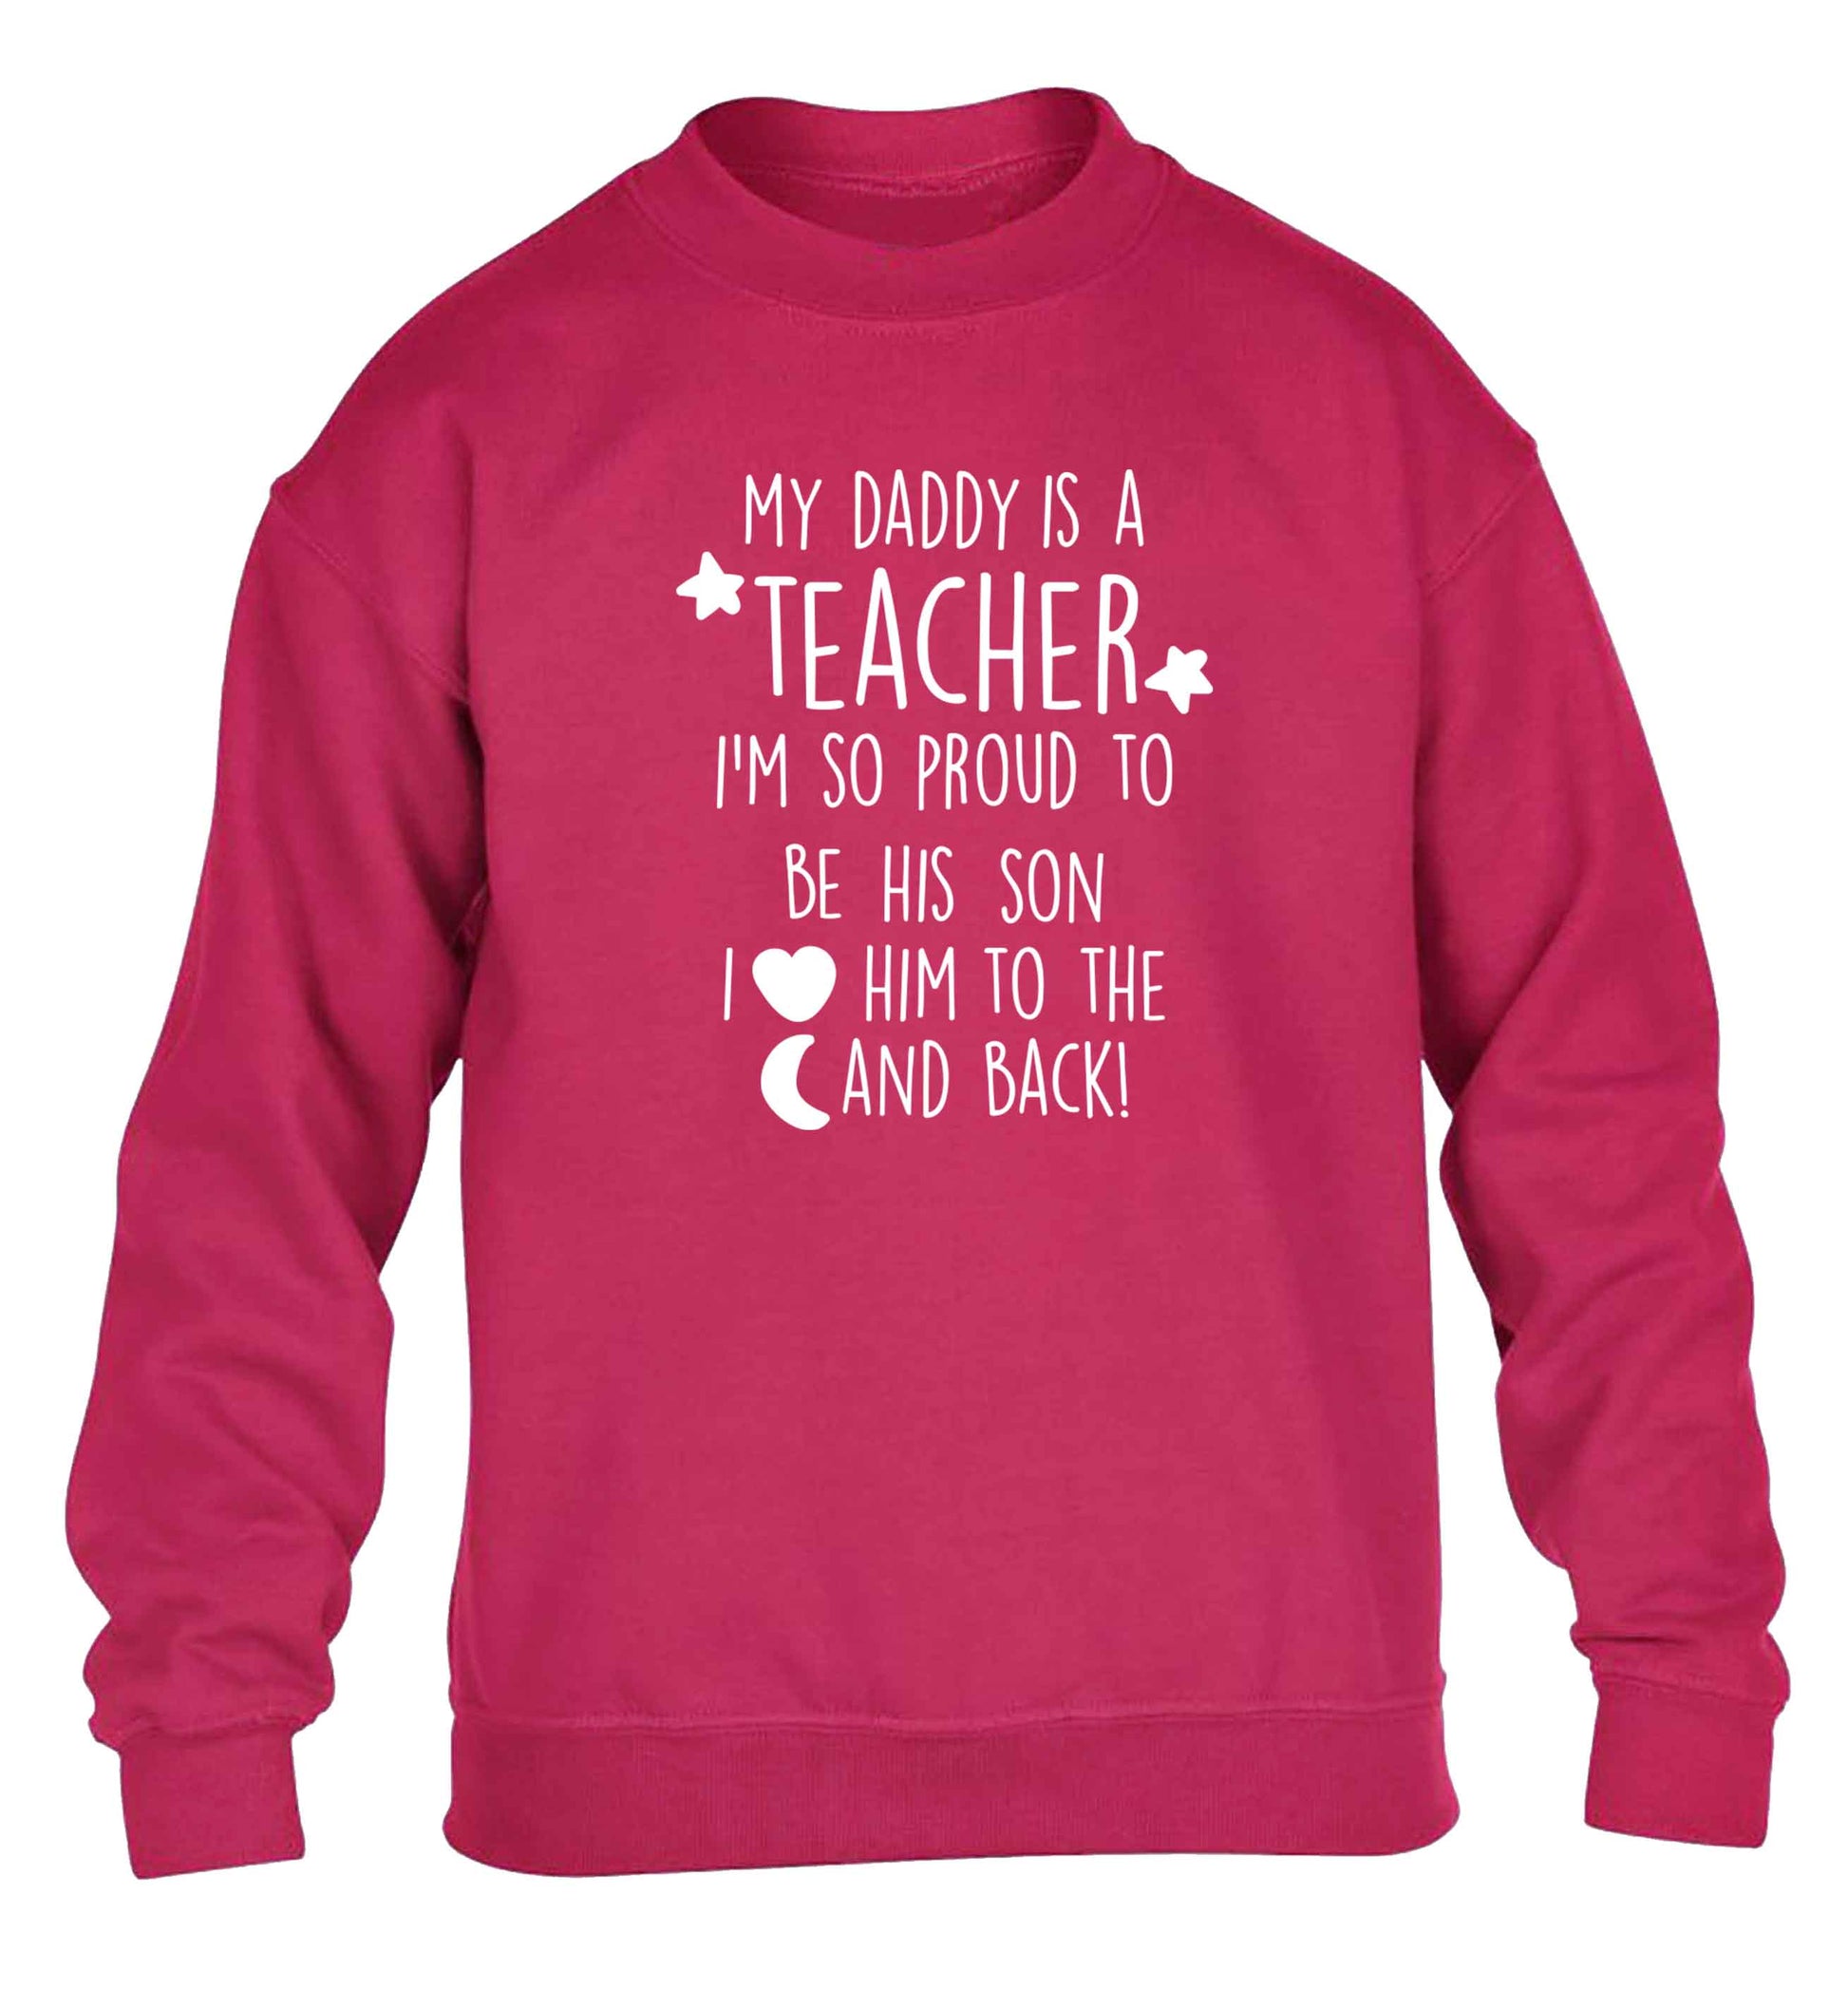 My daddy is a teacher I'm so proud to be his son I love her to the moon and back children's pink sweater 12-13 Years